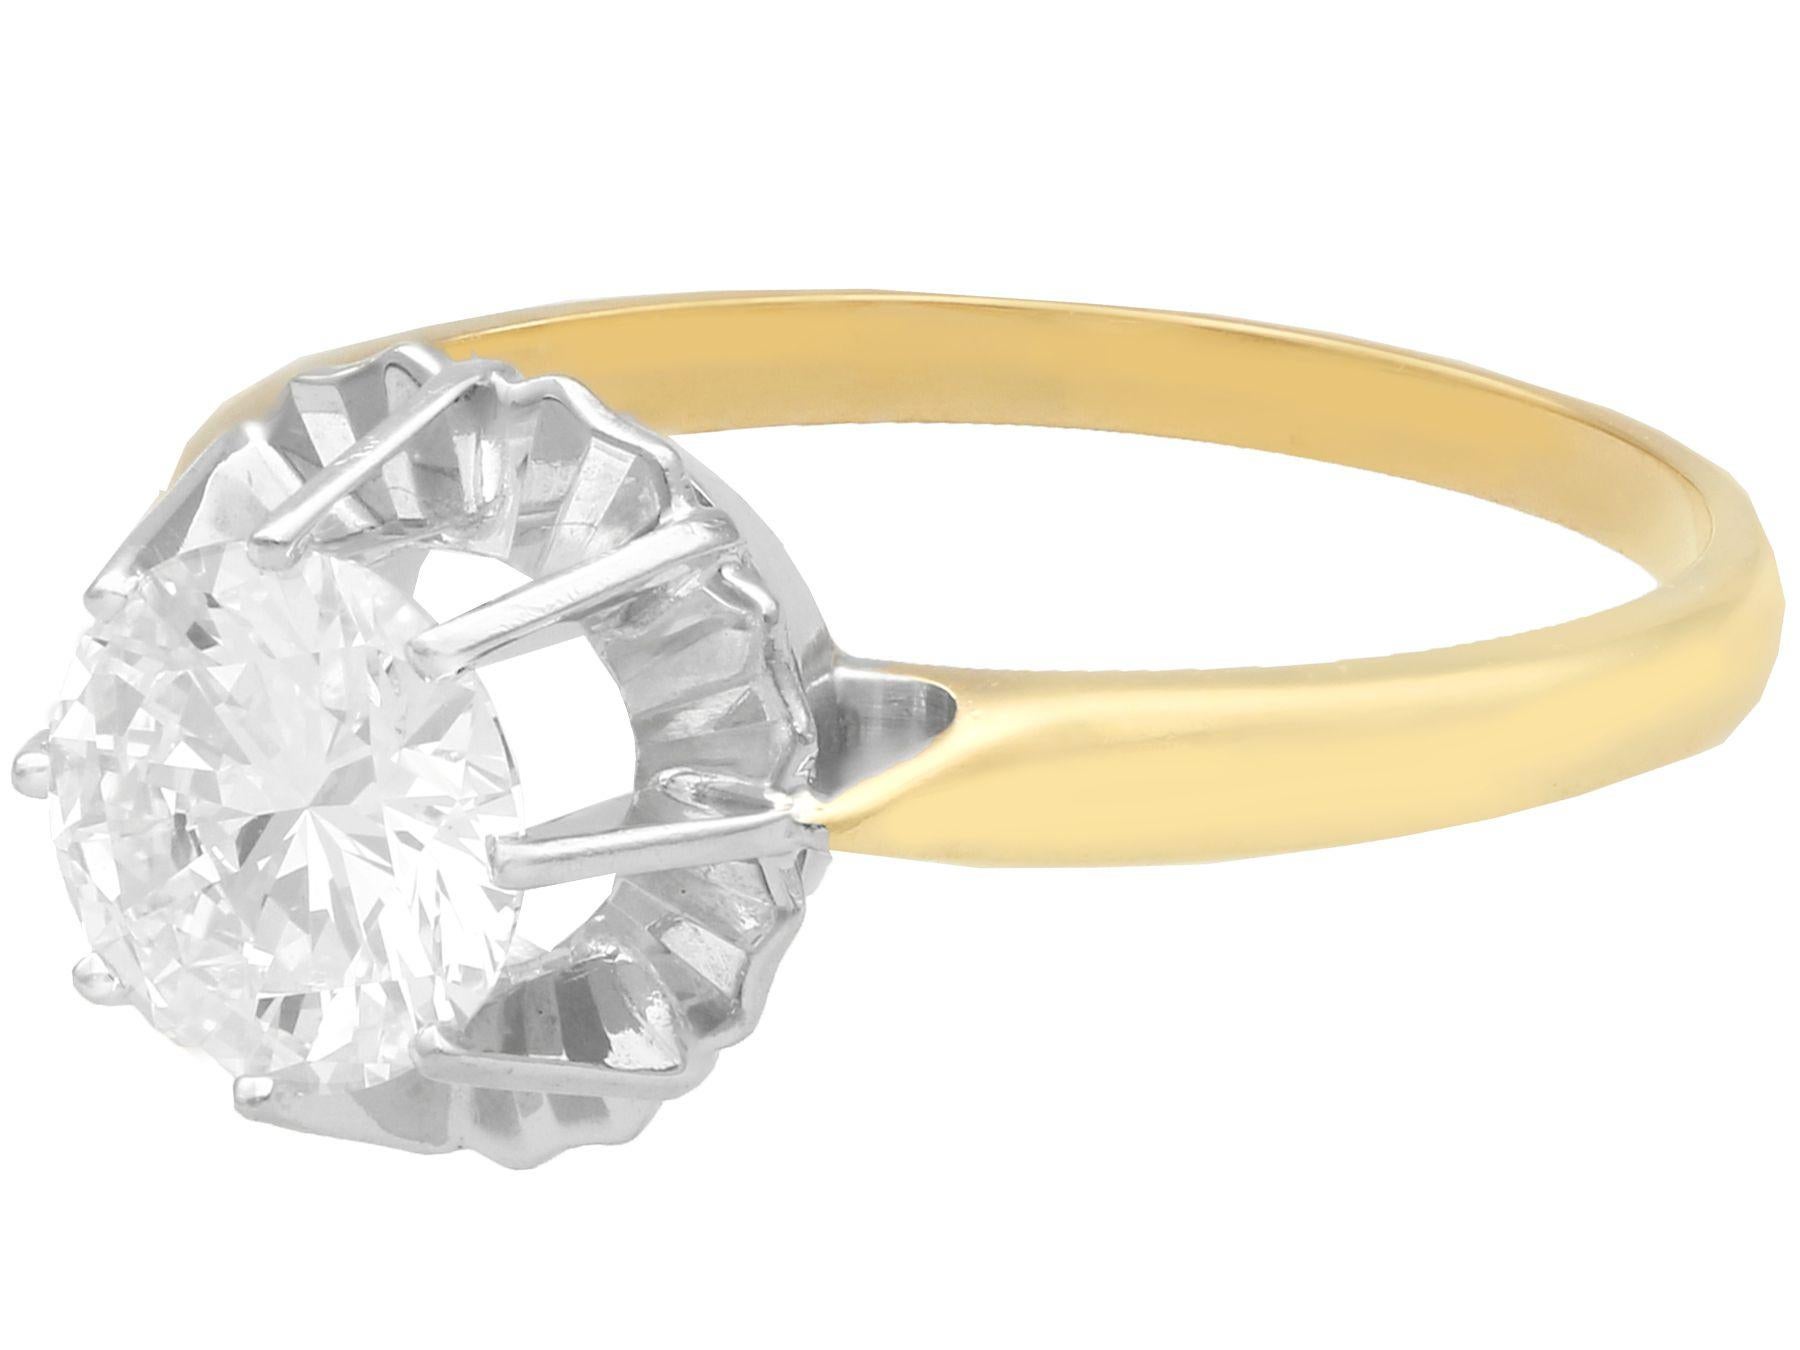 Round Cut Antique 1.18 Carat Diamond and Yellow Gold Solitaire Ring, circa 1930 For Sale